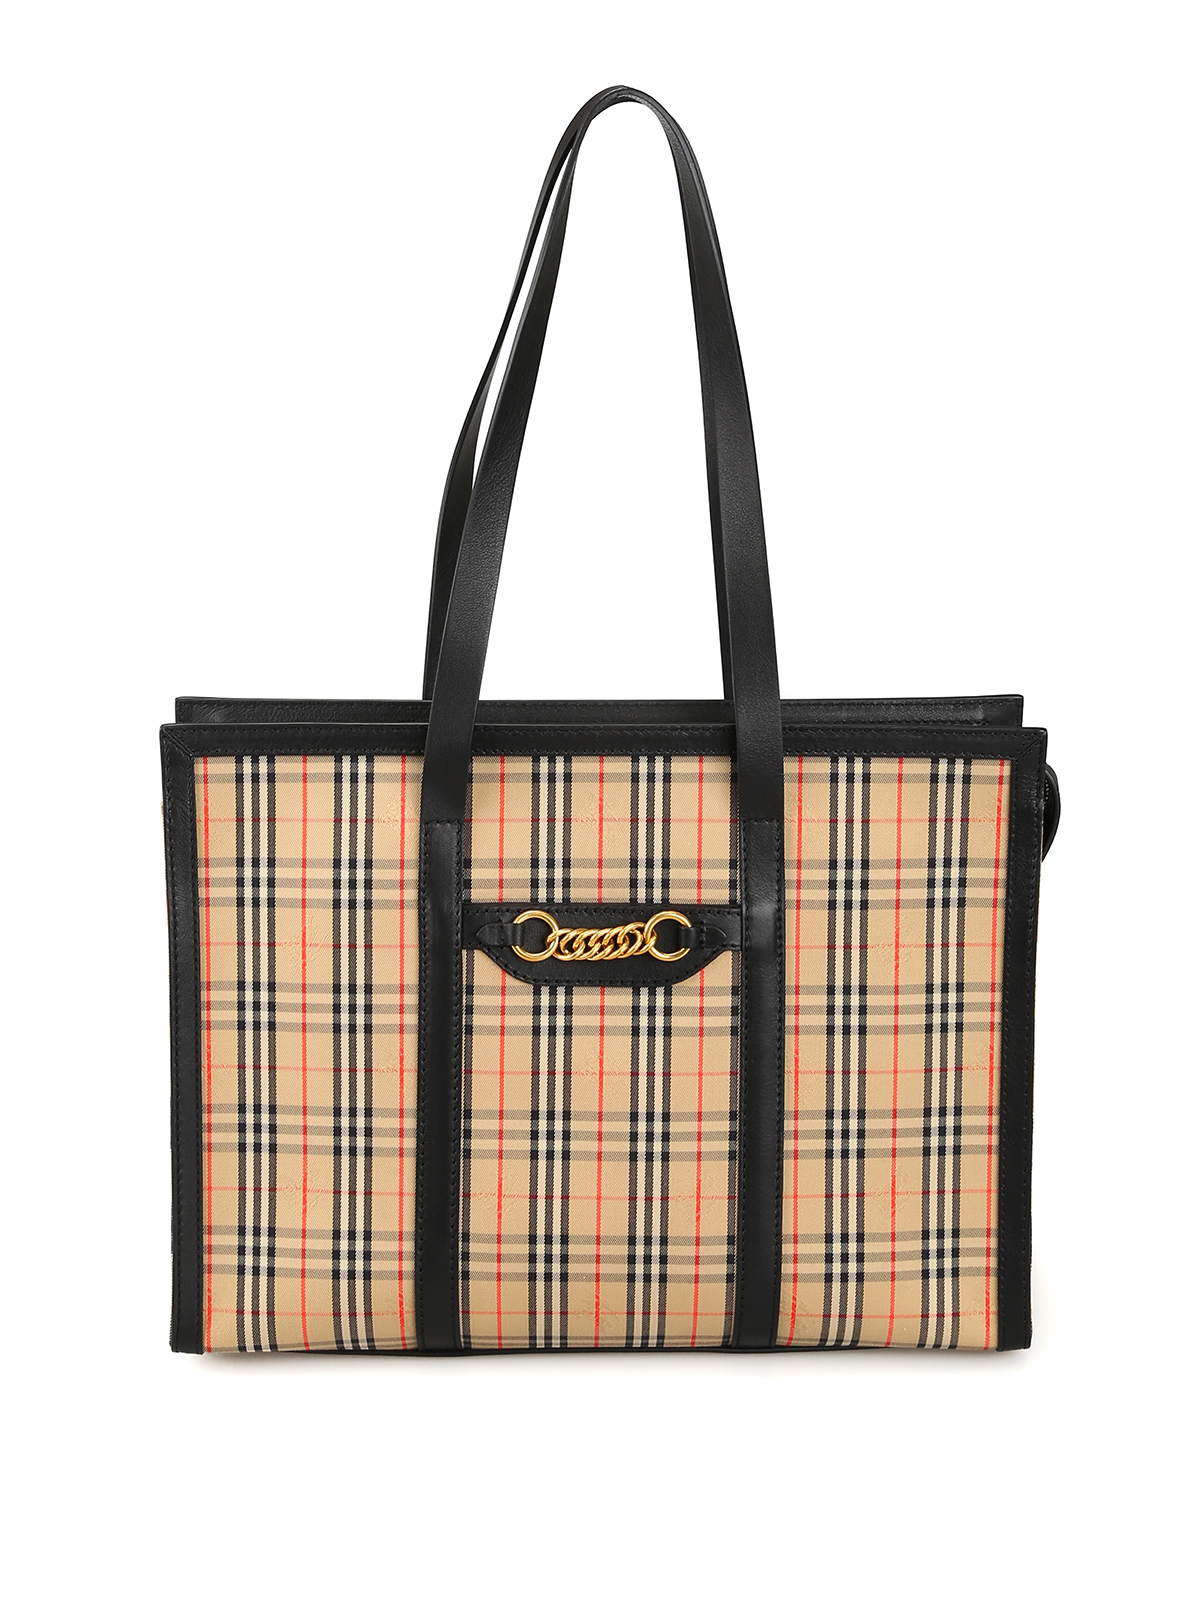 Totes bags Burberry - Vintage check Link zip tote - 8006411 